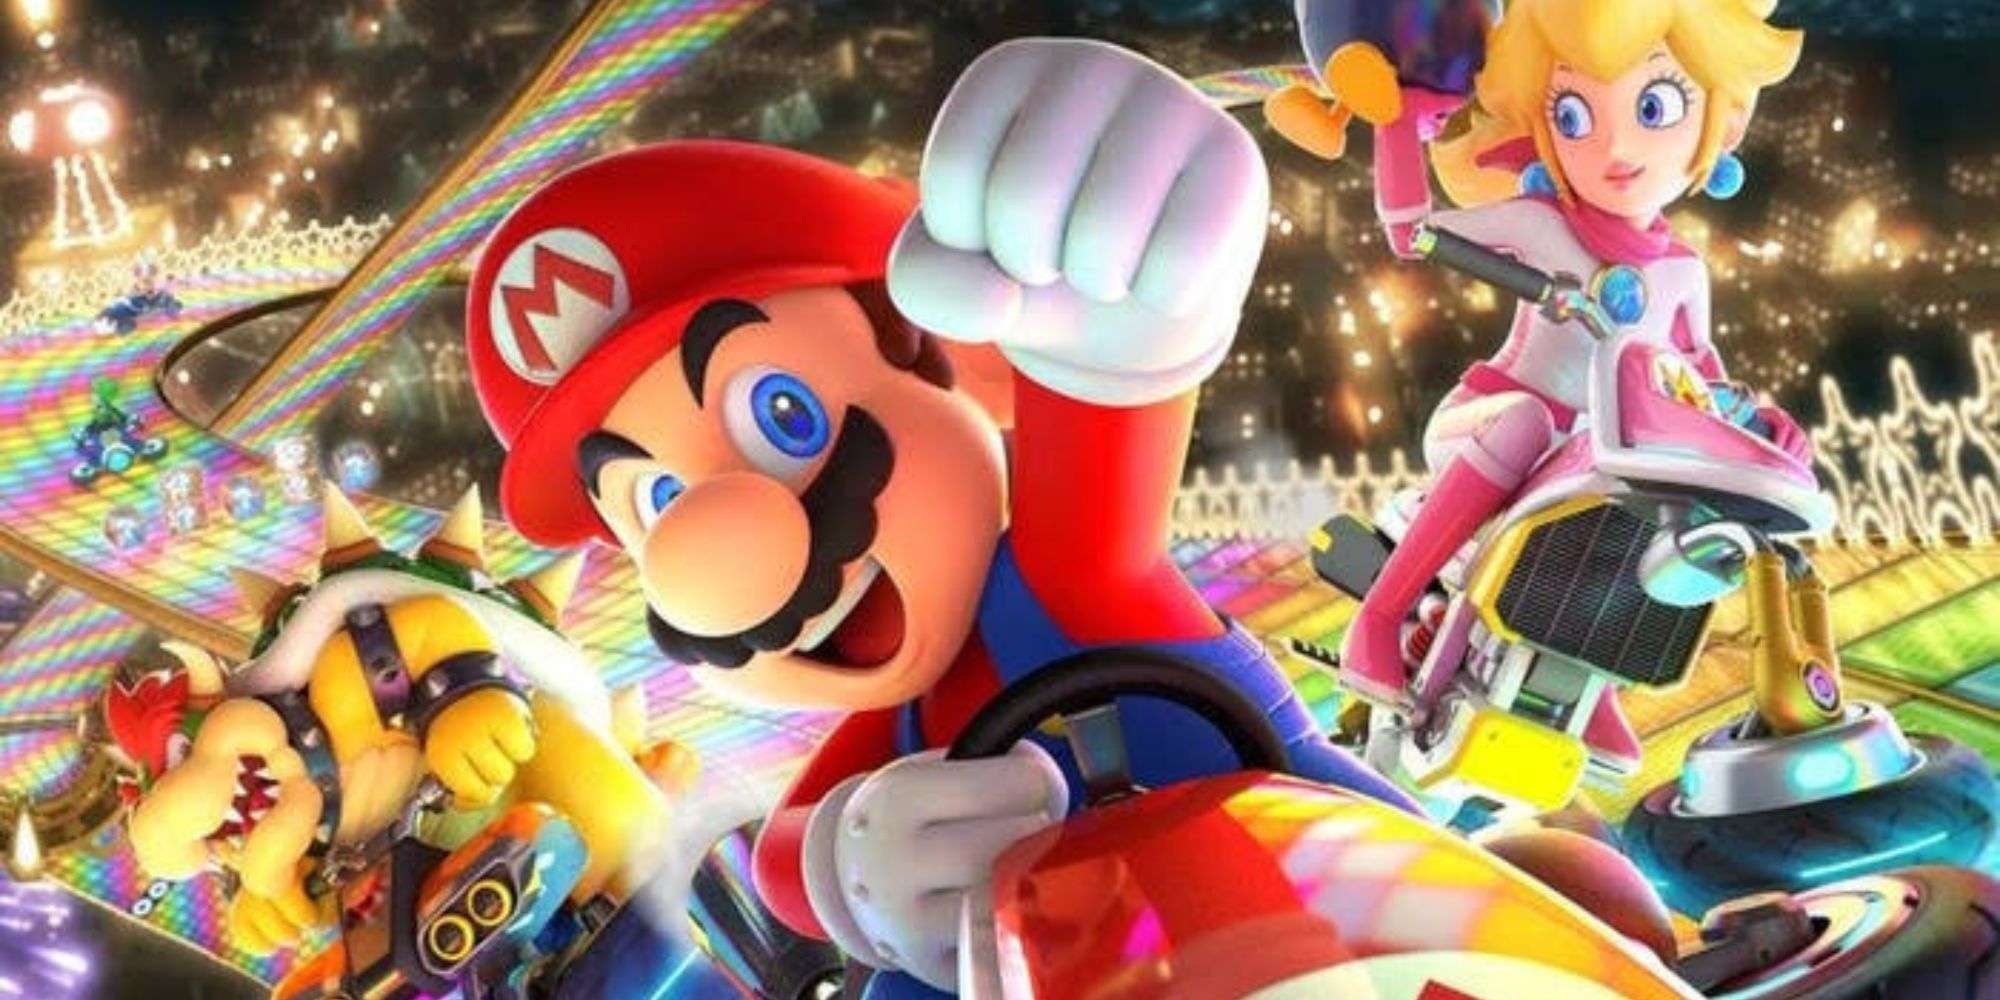 Mario raises his fist on Rainbow Road with Bowser and Princess Peach behind him